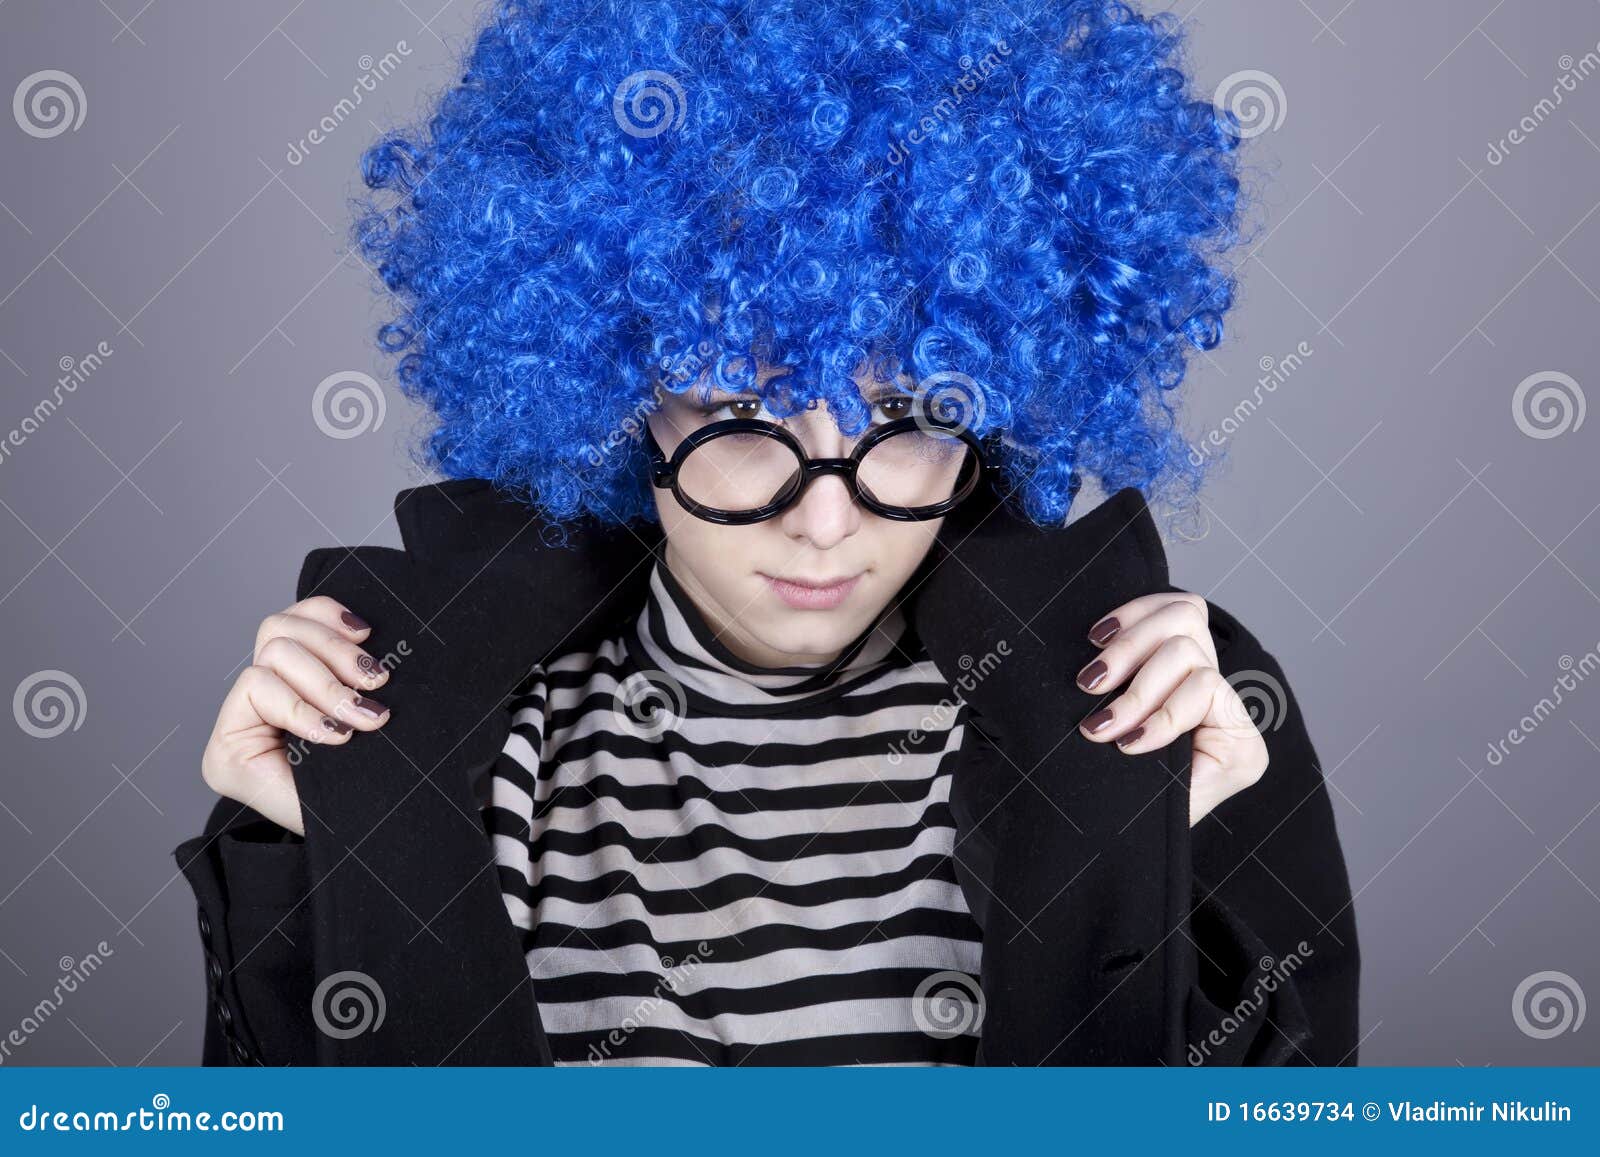 7. Teenager with dark blue hair and glasses - wide 7